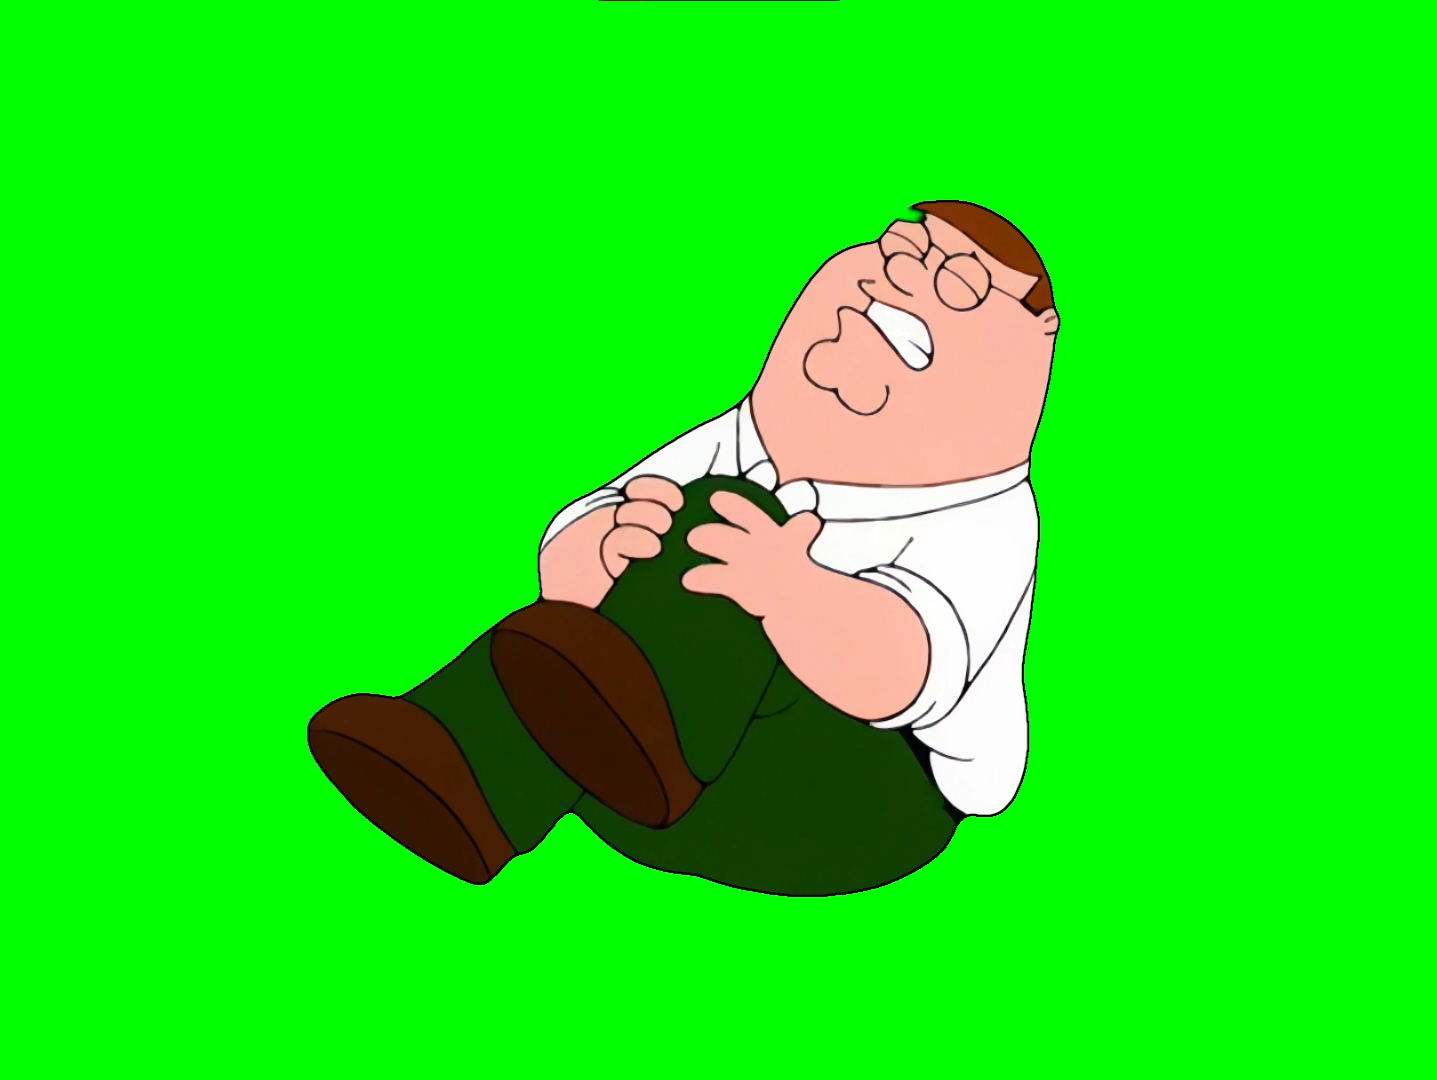 Peter Griffin Hurts His Knee meme - Family Guy (Green Screen)